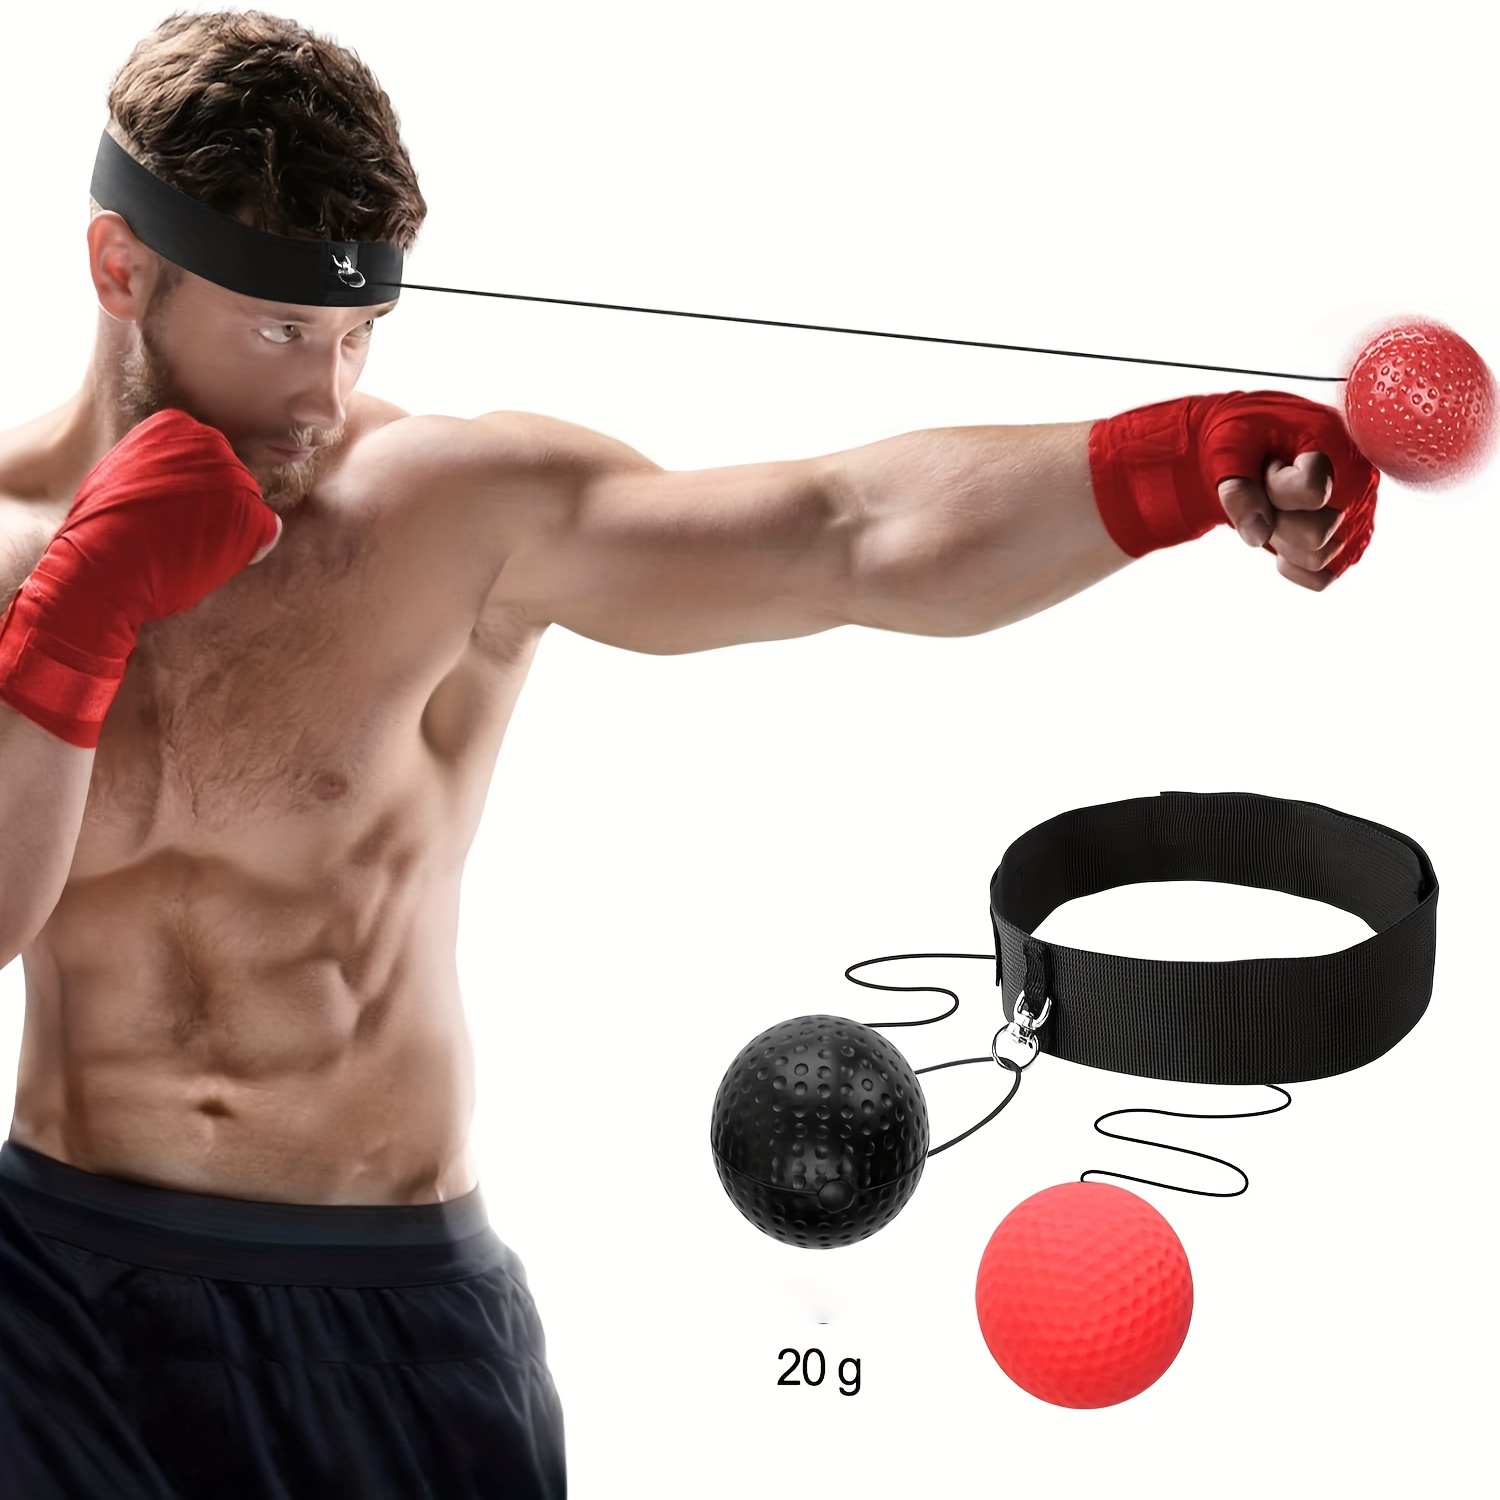 Improve Reaction Speed and Hand-eye Coordination With This Boxing Reflex Ball Set Gift Set - Includes 2 Balls and 1 Head Band For Training At Home!